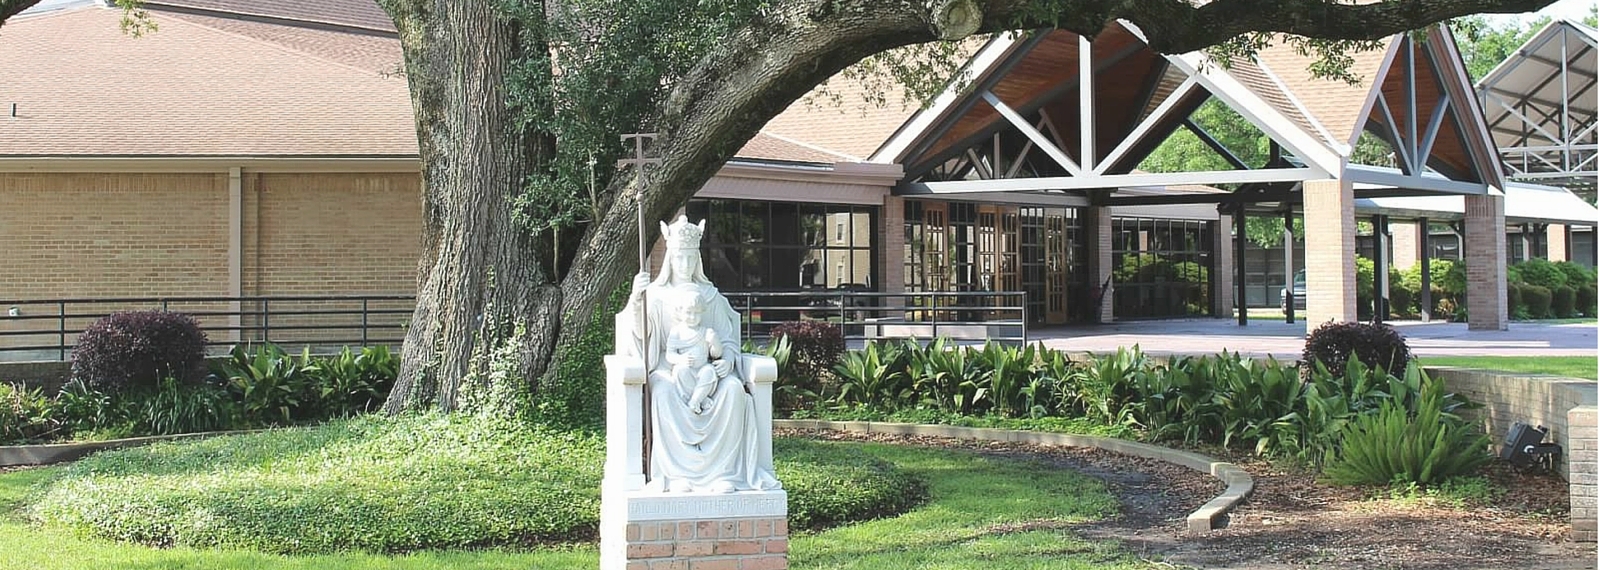 Our Lady of Perpetual Help Catholic Church Belle Chasse, LA